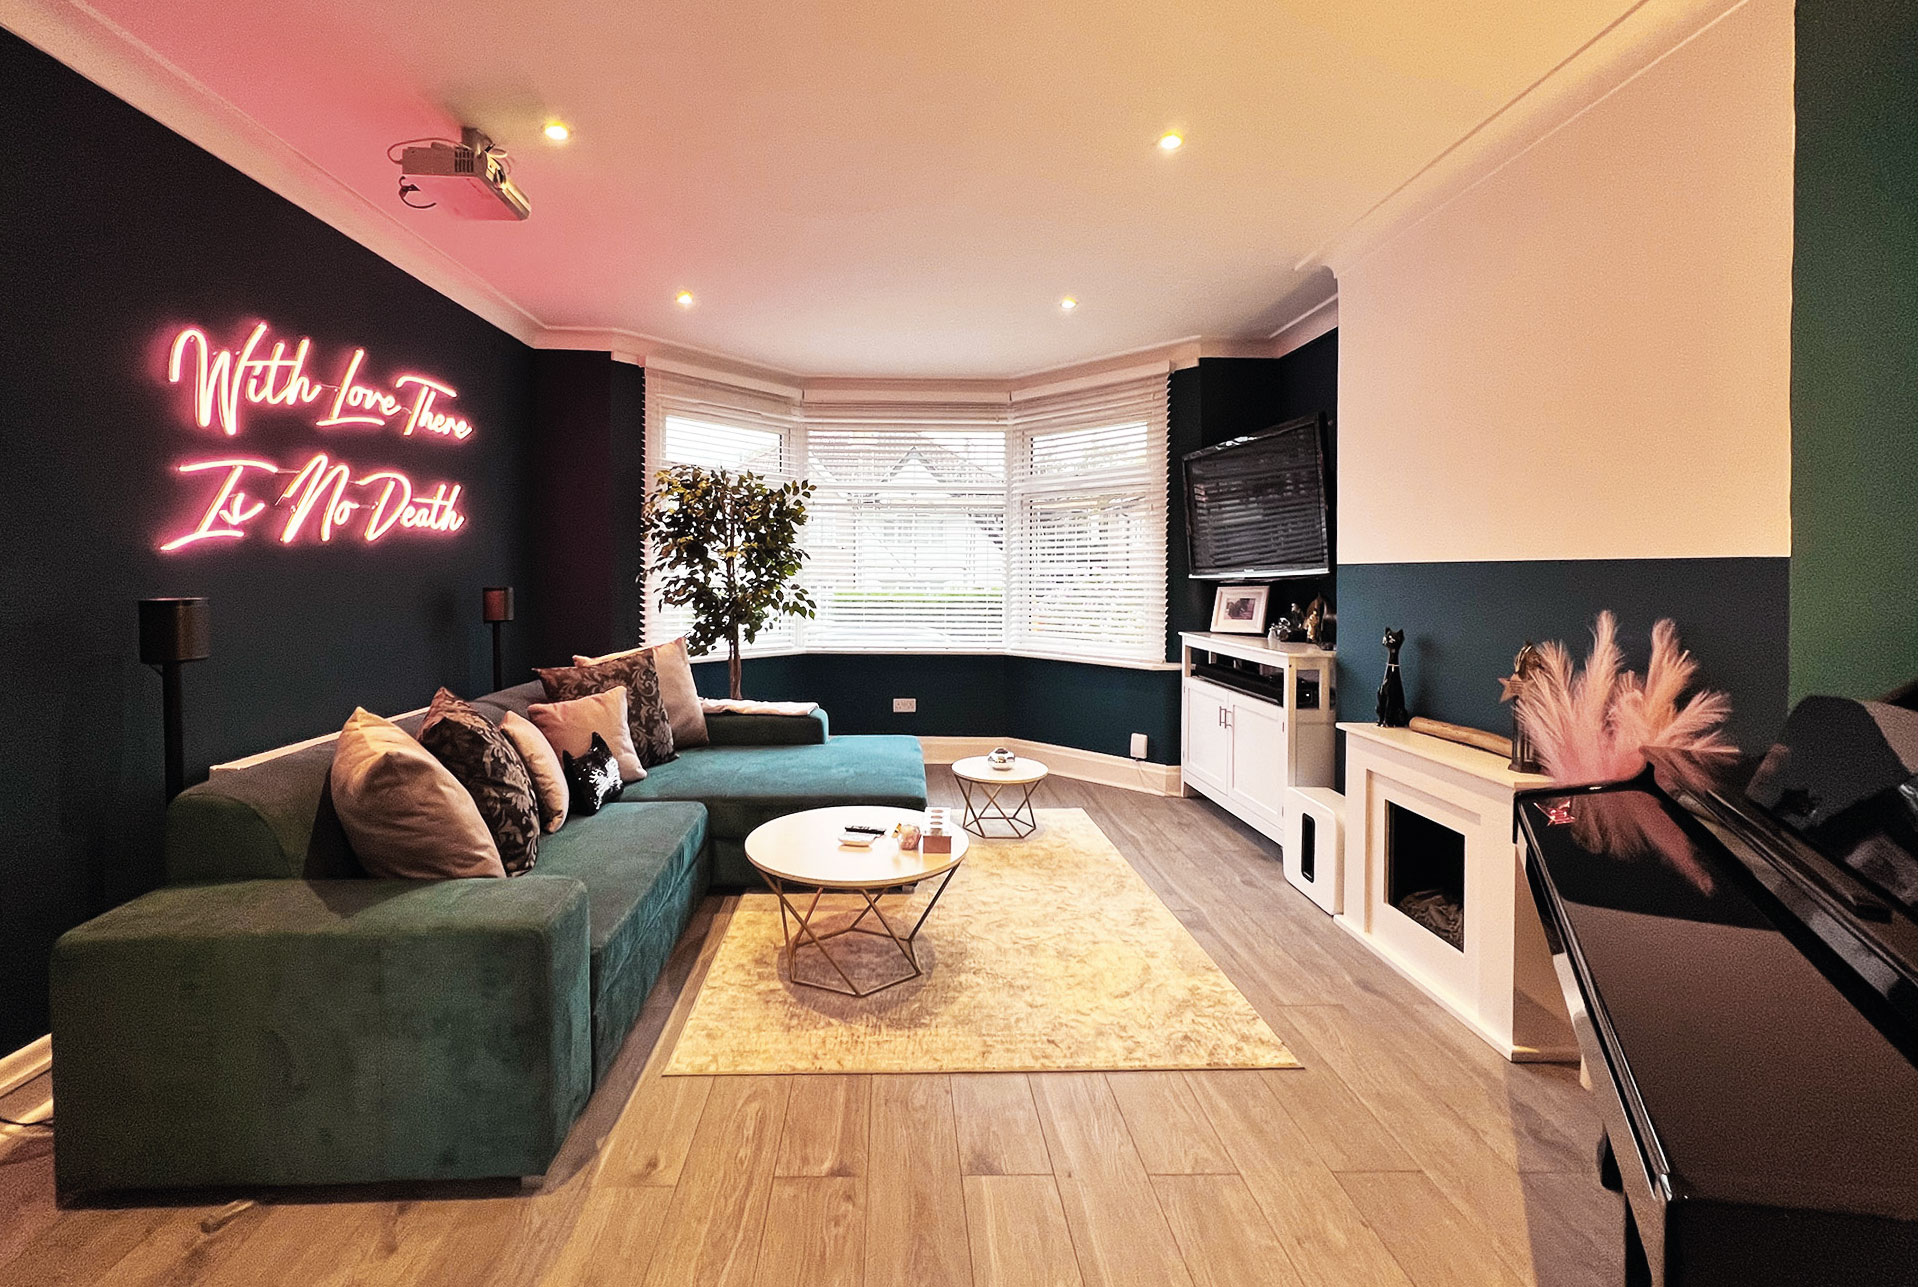 A contemporary lounge with teal and white walls, a modern engineered wood floor with a decorative rug and a luxurious velvet teal L-shaped sofa with a neon light on the wall behind it.